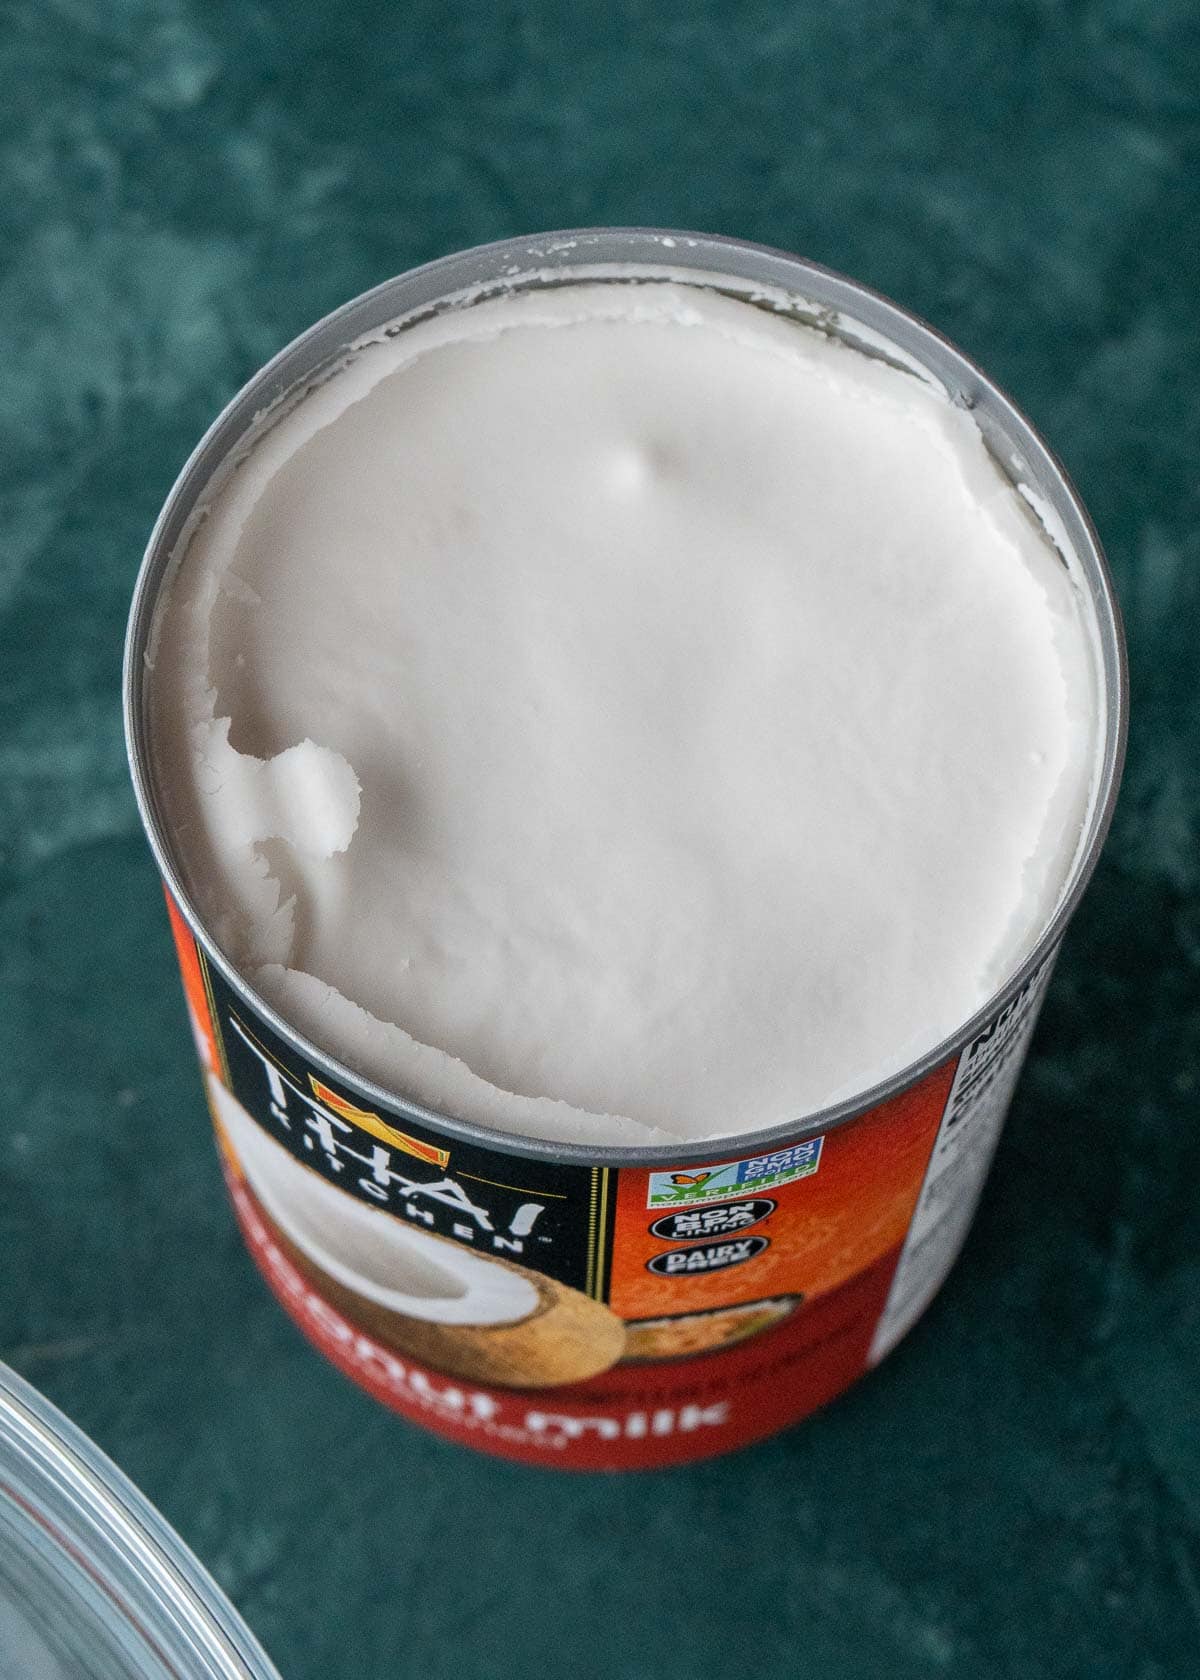 Overhead view of an opened can of coconut milk